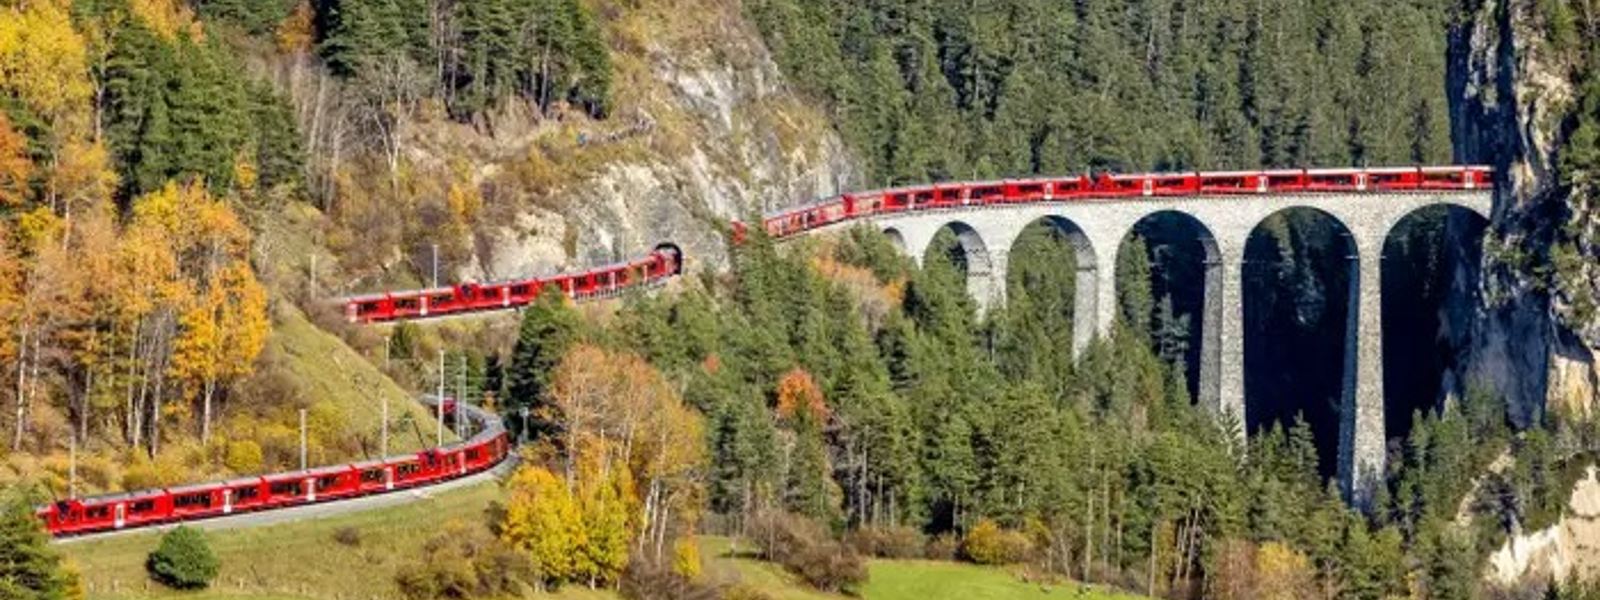 This Train in Switzerland is the World's Longest